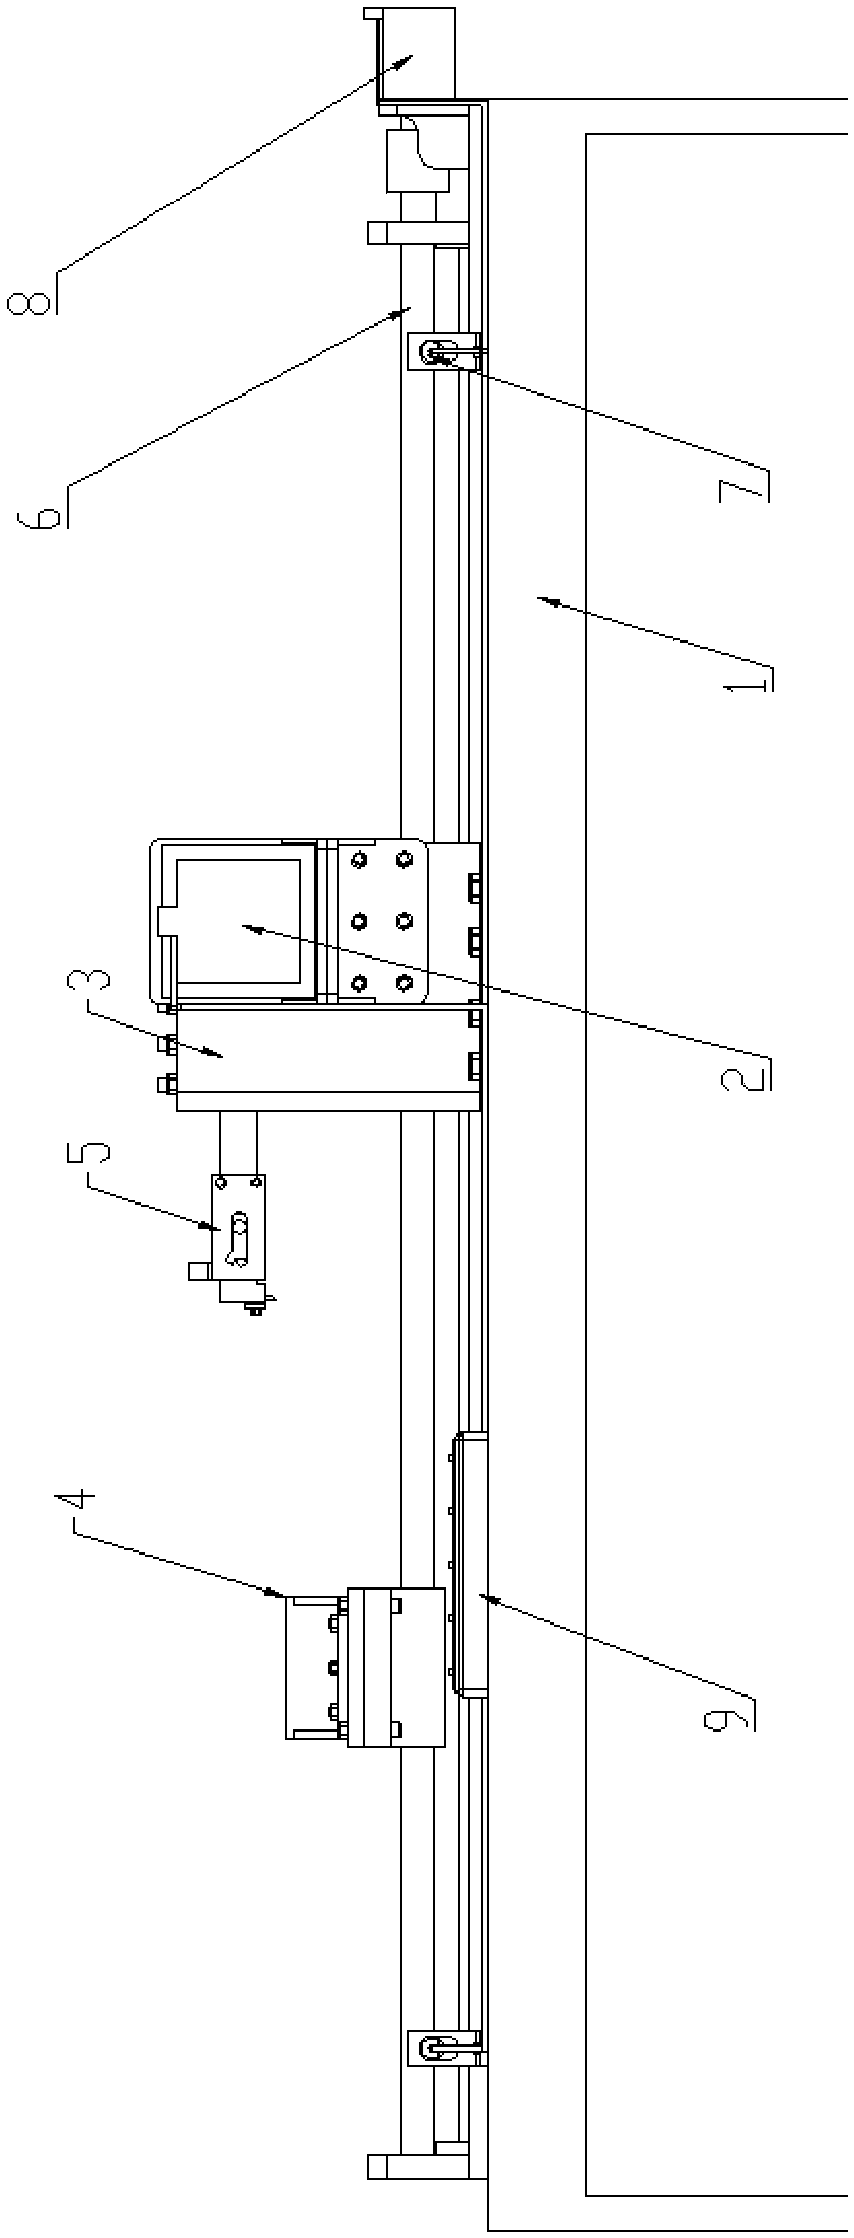 Simulated vibration cutting impact cutter falling experimental device and a working method thereof